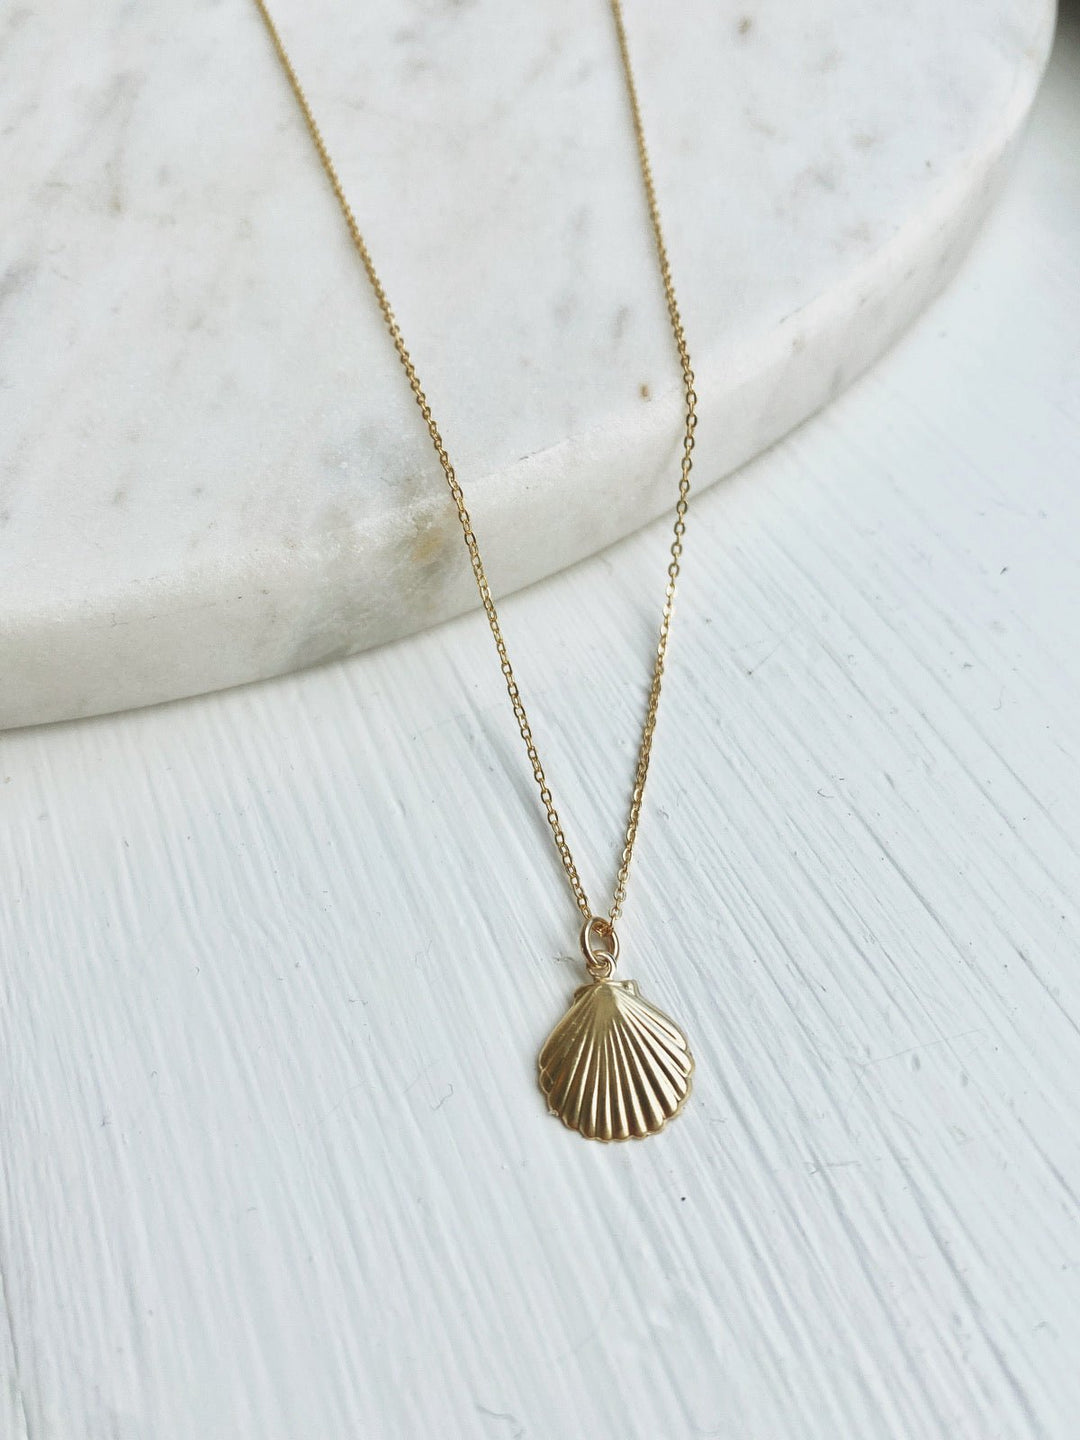 Seashell Necklace, Gold Filled - Spring Sweet